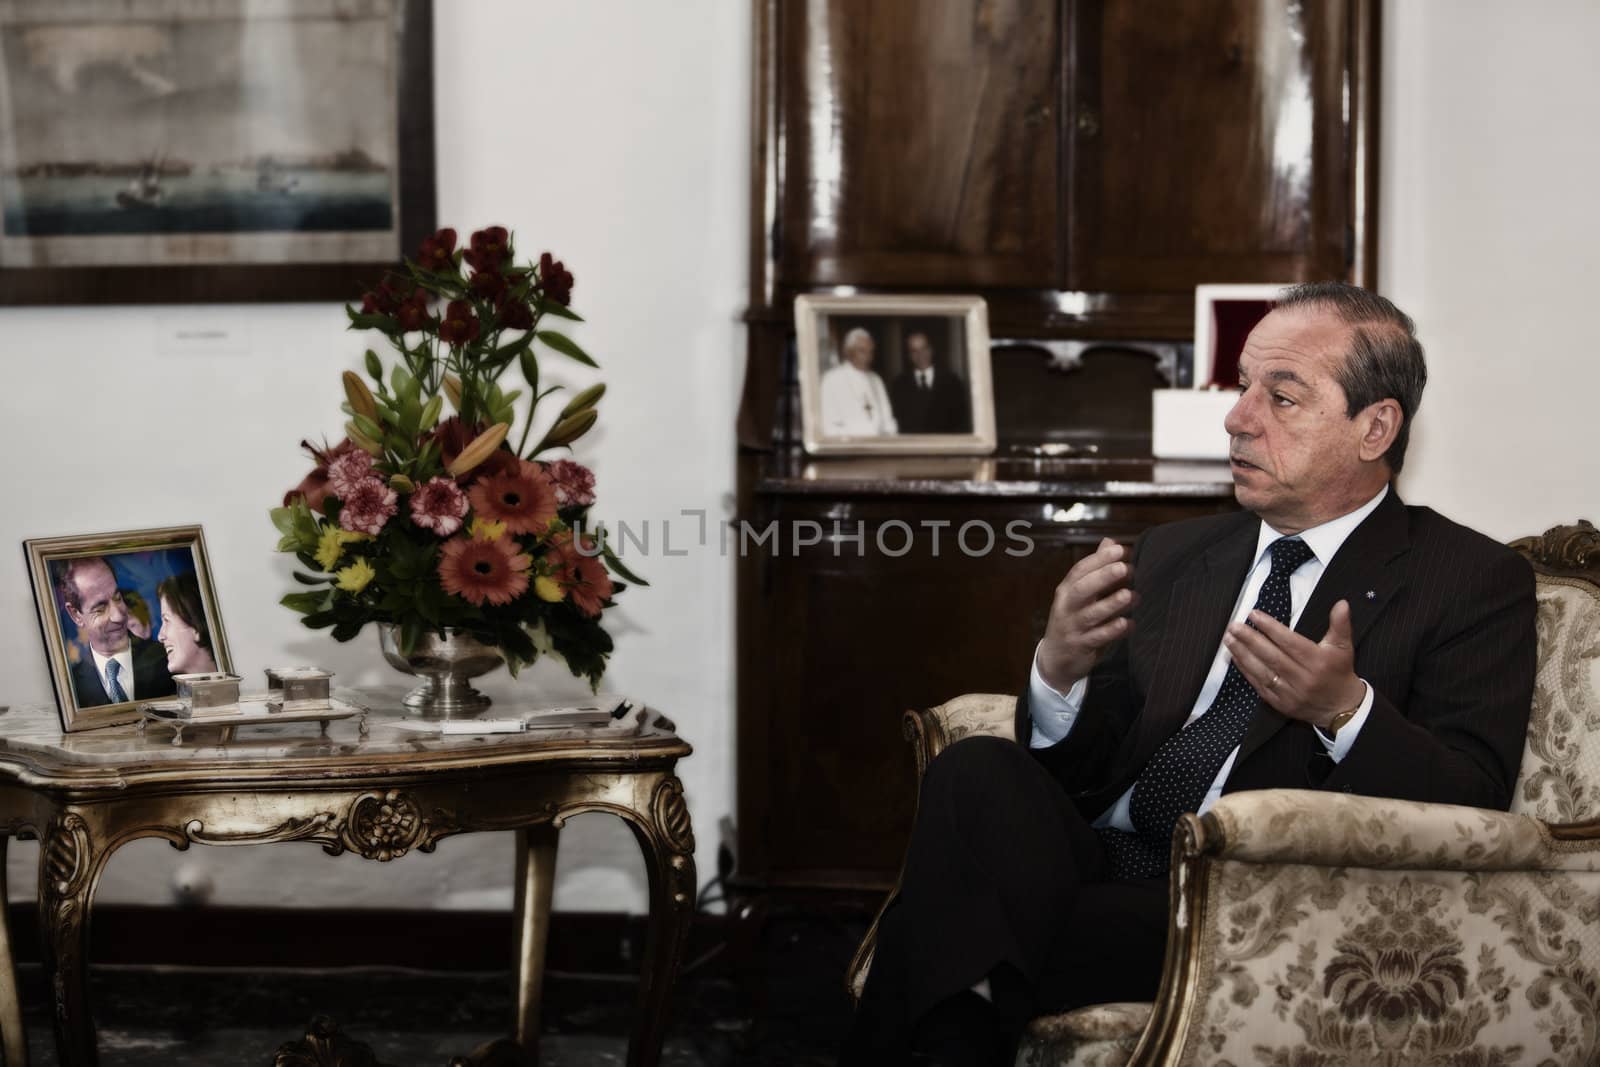 OPM, AUBERGE DE CASTILLE, VALLETTA, MALTA - MAY 12 - The Prime Minister of Malta, Dr. Lawrence Gonzi, in his office on 12 May 2011.